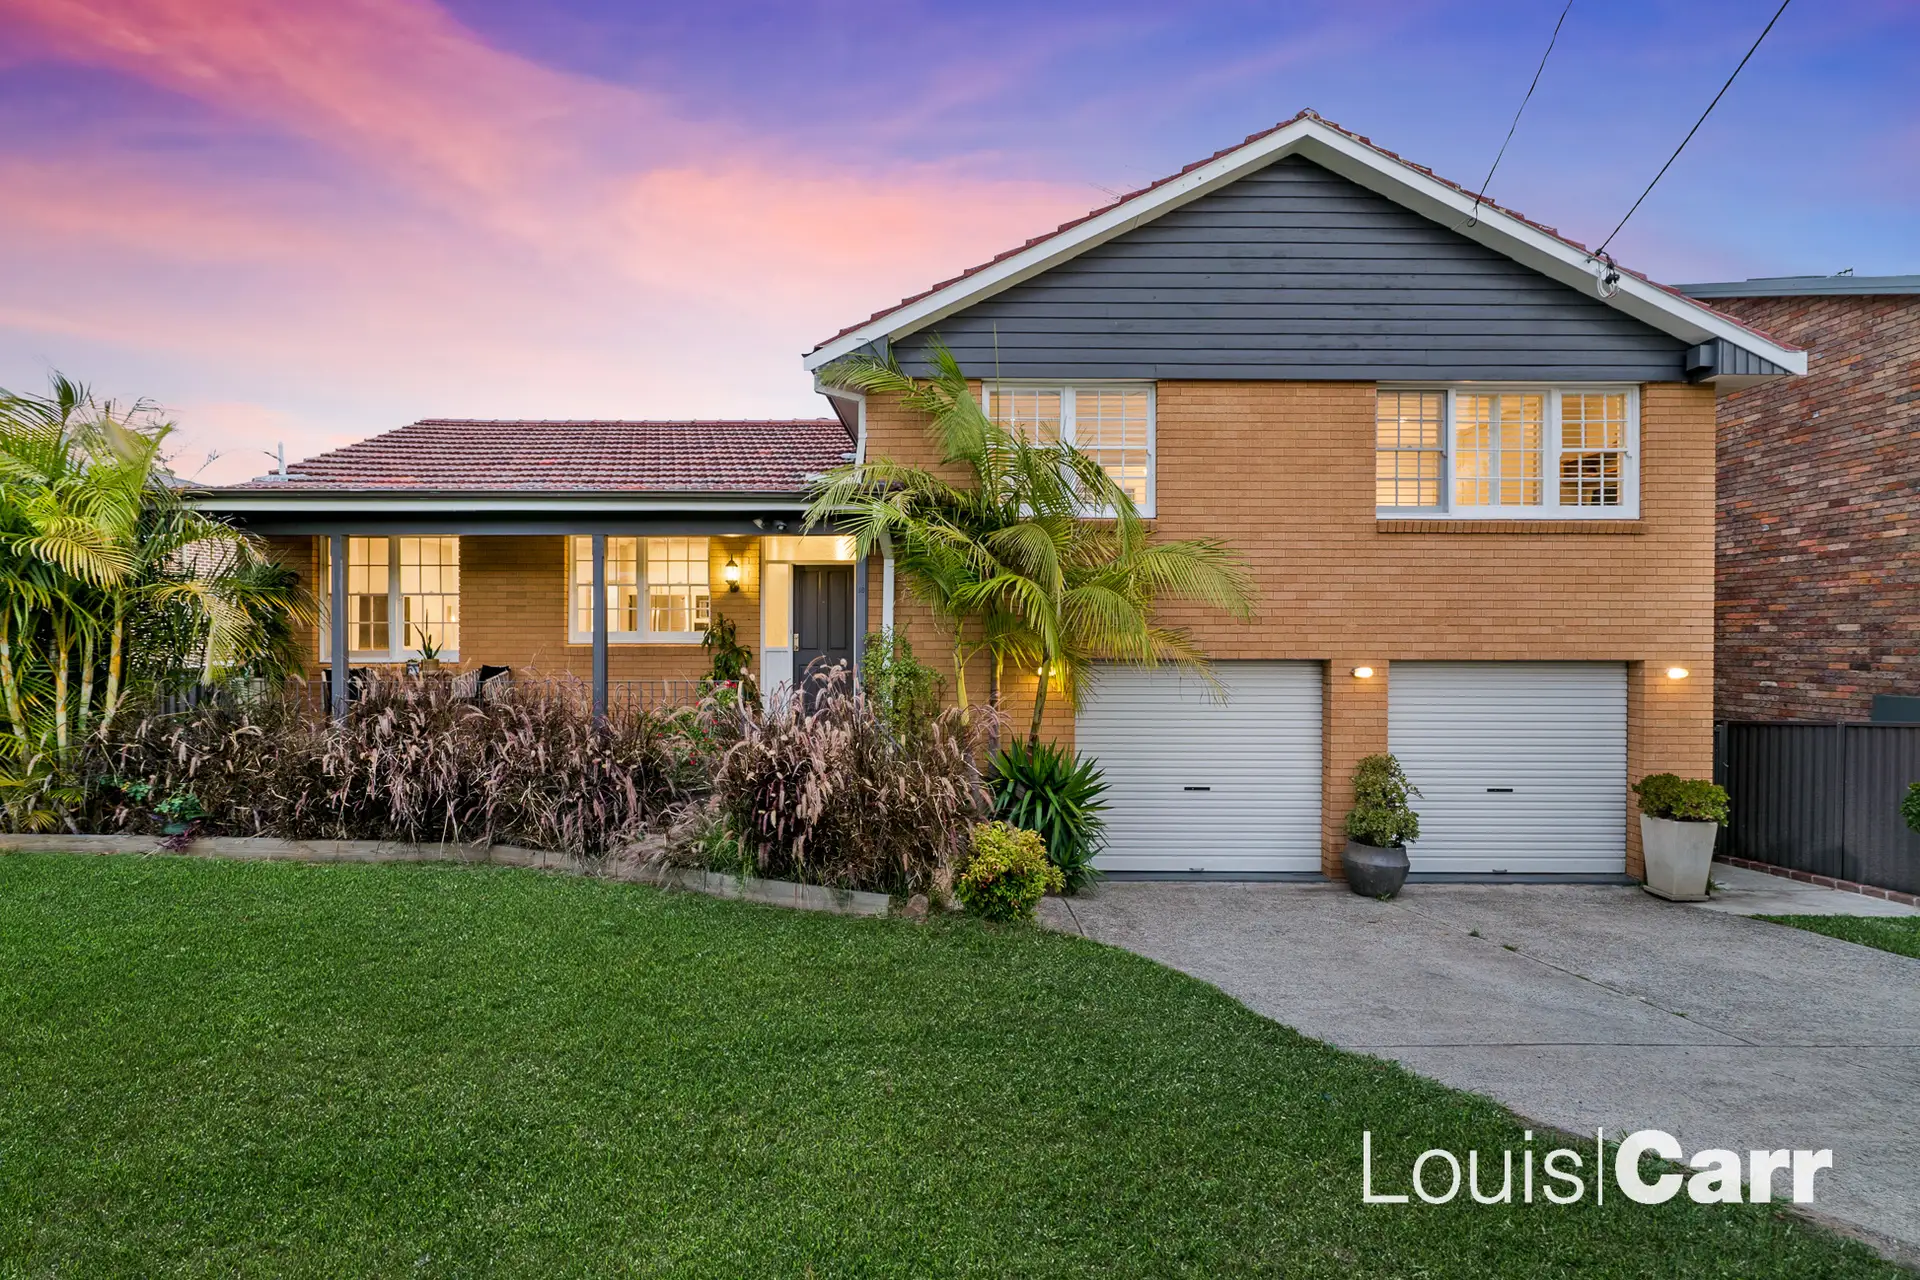 Photo #1: 18 Aiken Road, West Pennant Hills - Sold by Louis Carr Real Estate